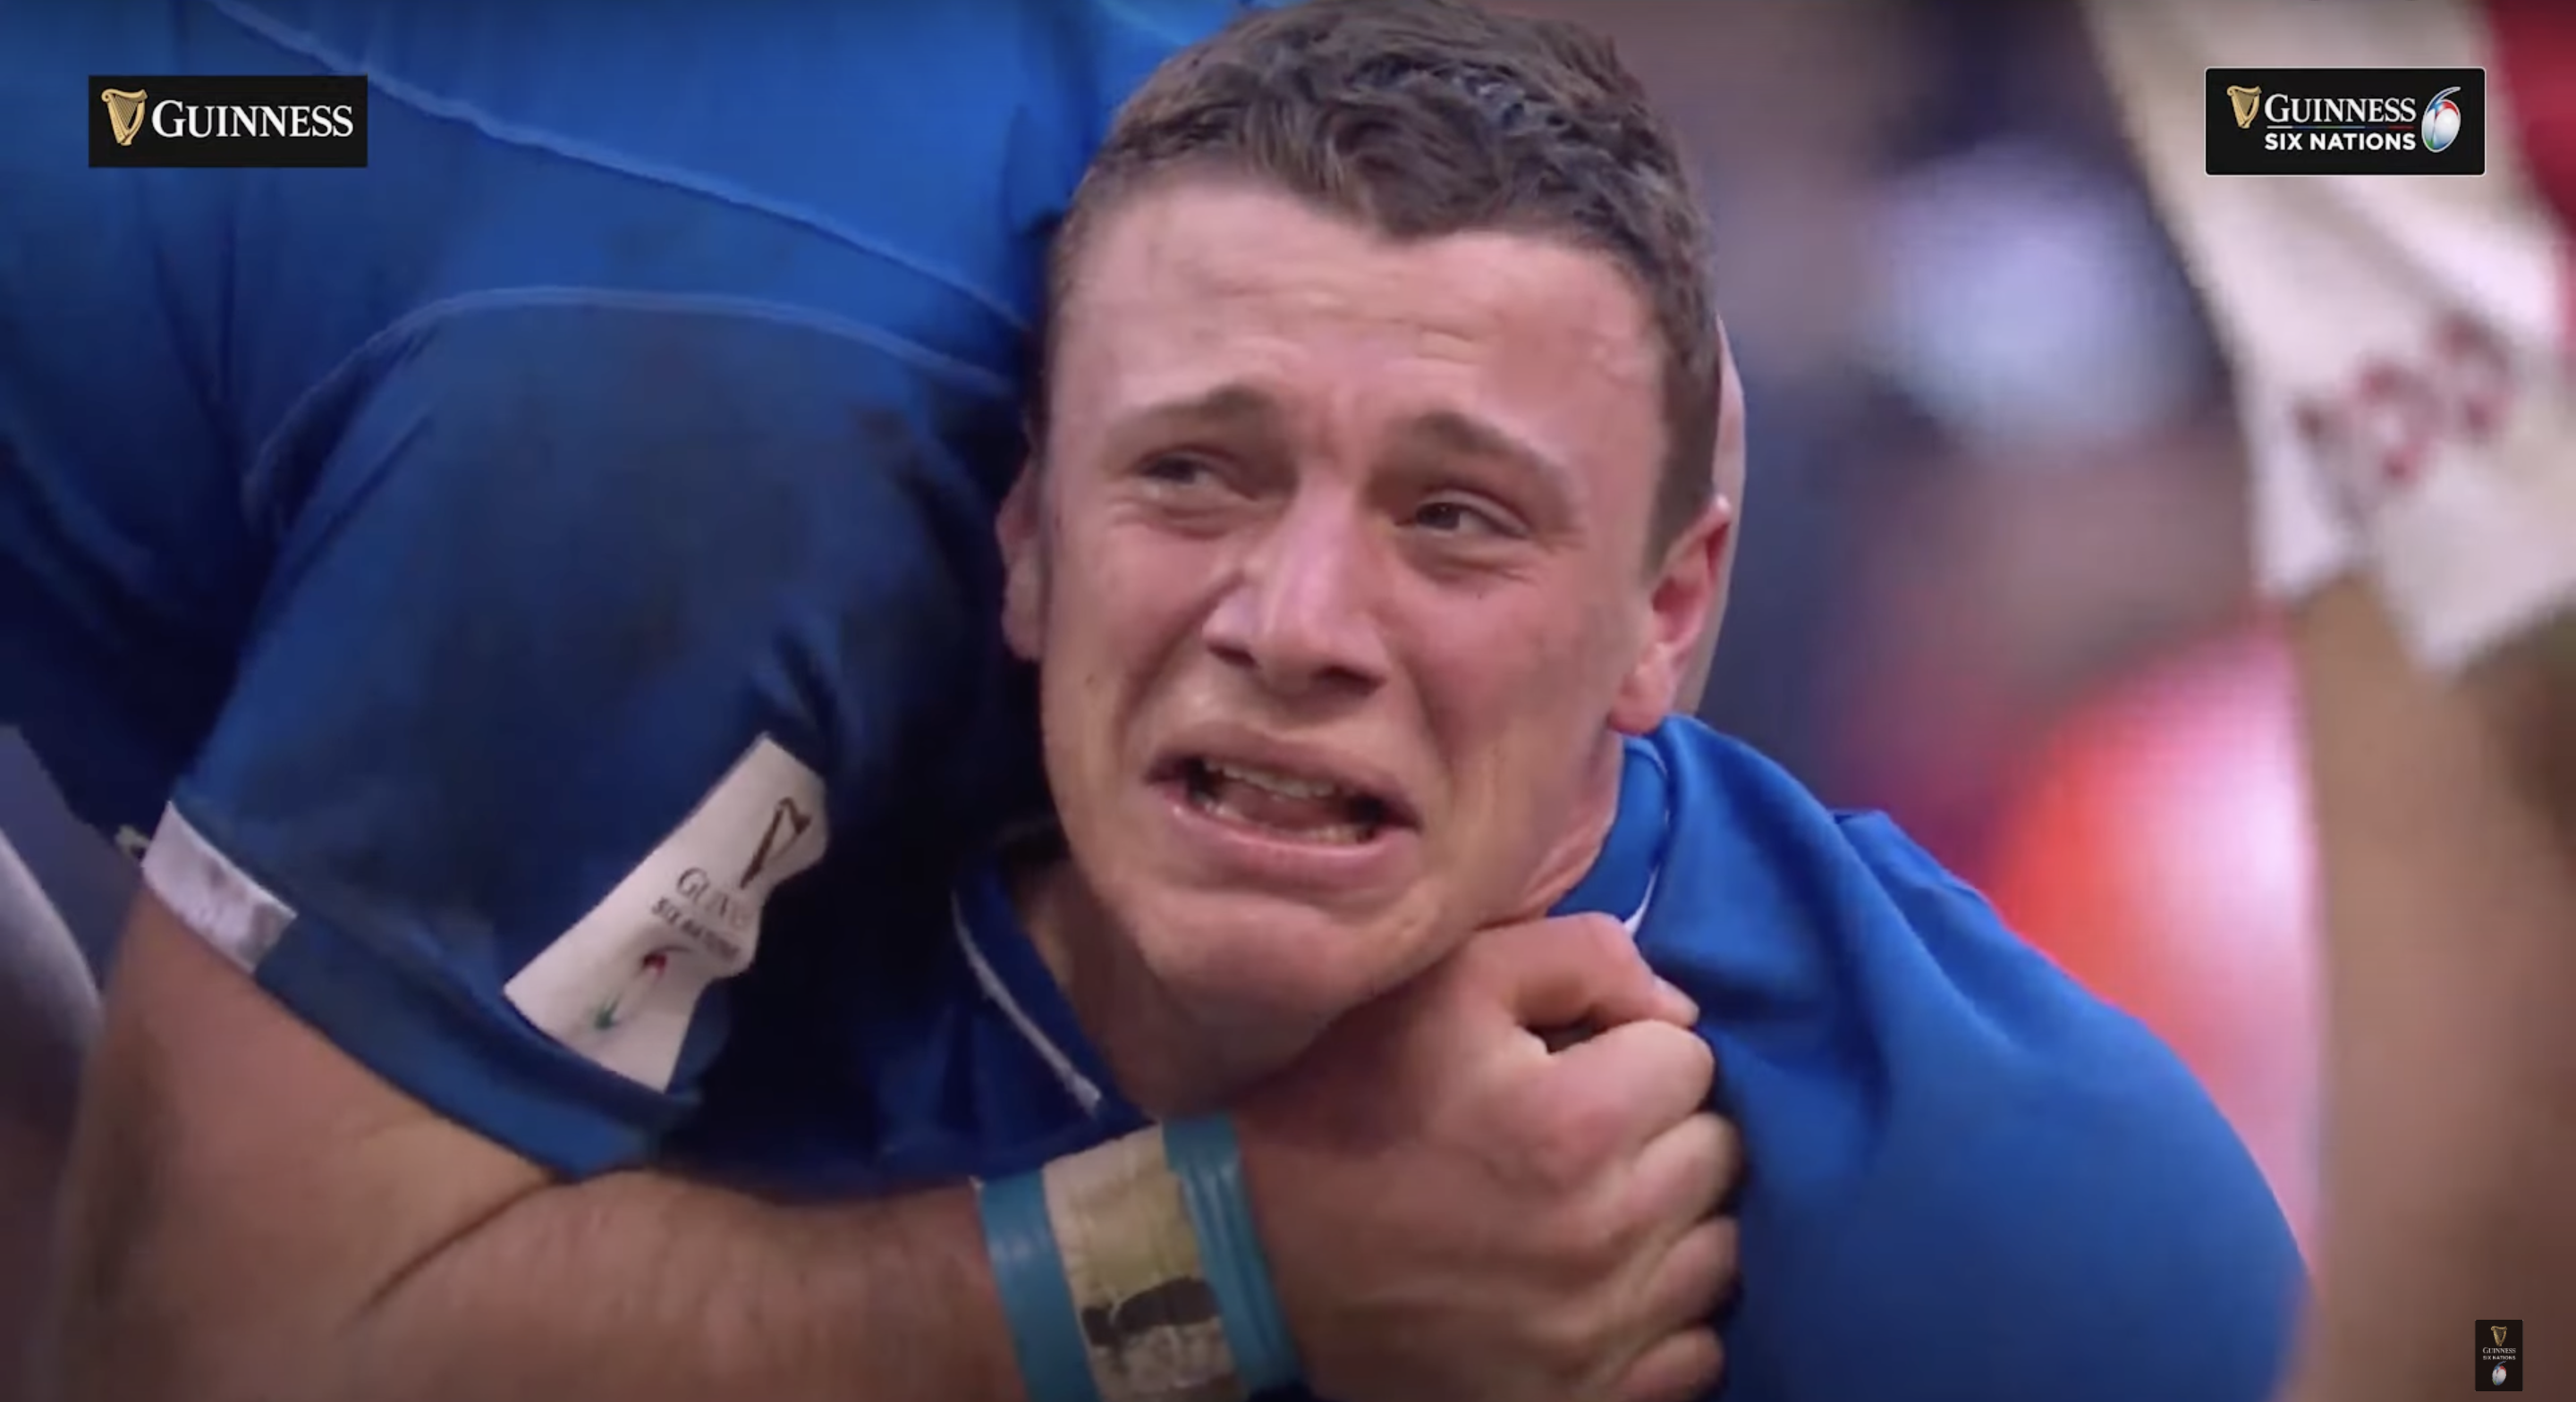 Italy's winning try with Italian commentary is absolutely priceless